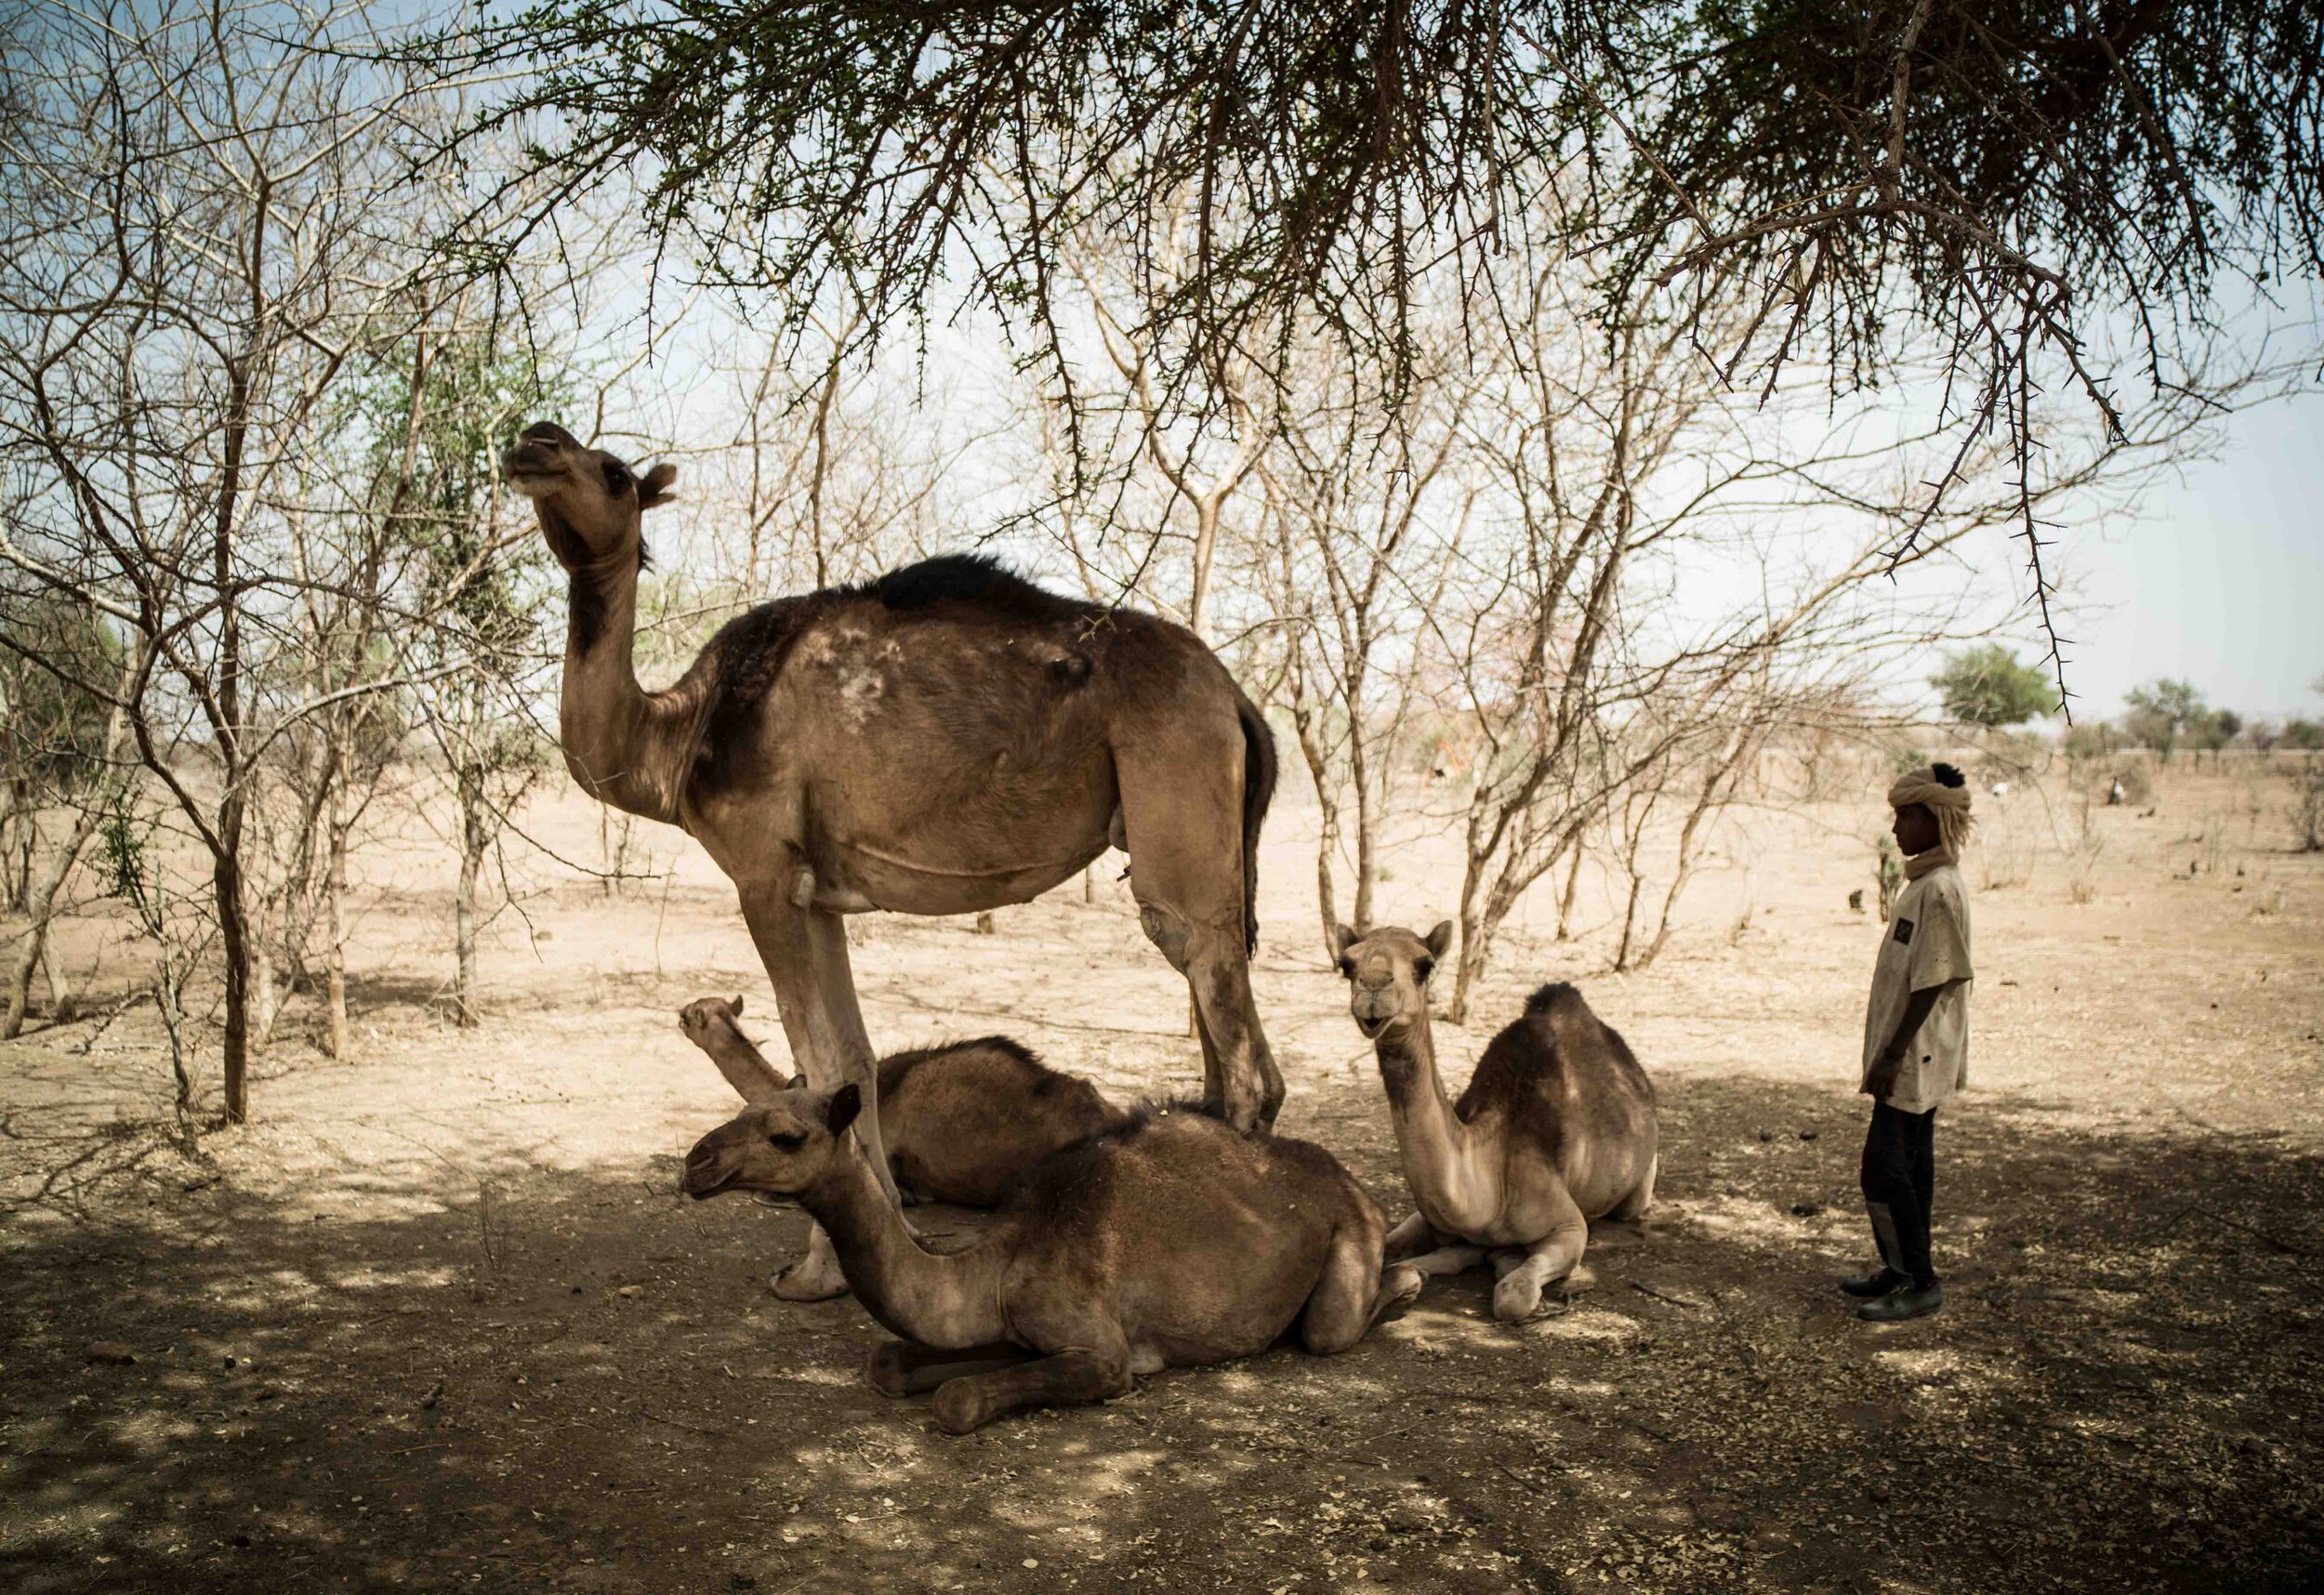  camels are known to have a power to withhold their milk - if they don’t know the person who is taking out their milk or if they don’t like their herder, they will keep the milk inside their bodies and the herder will not be able to take it out no ma